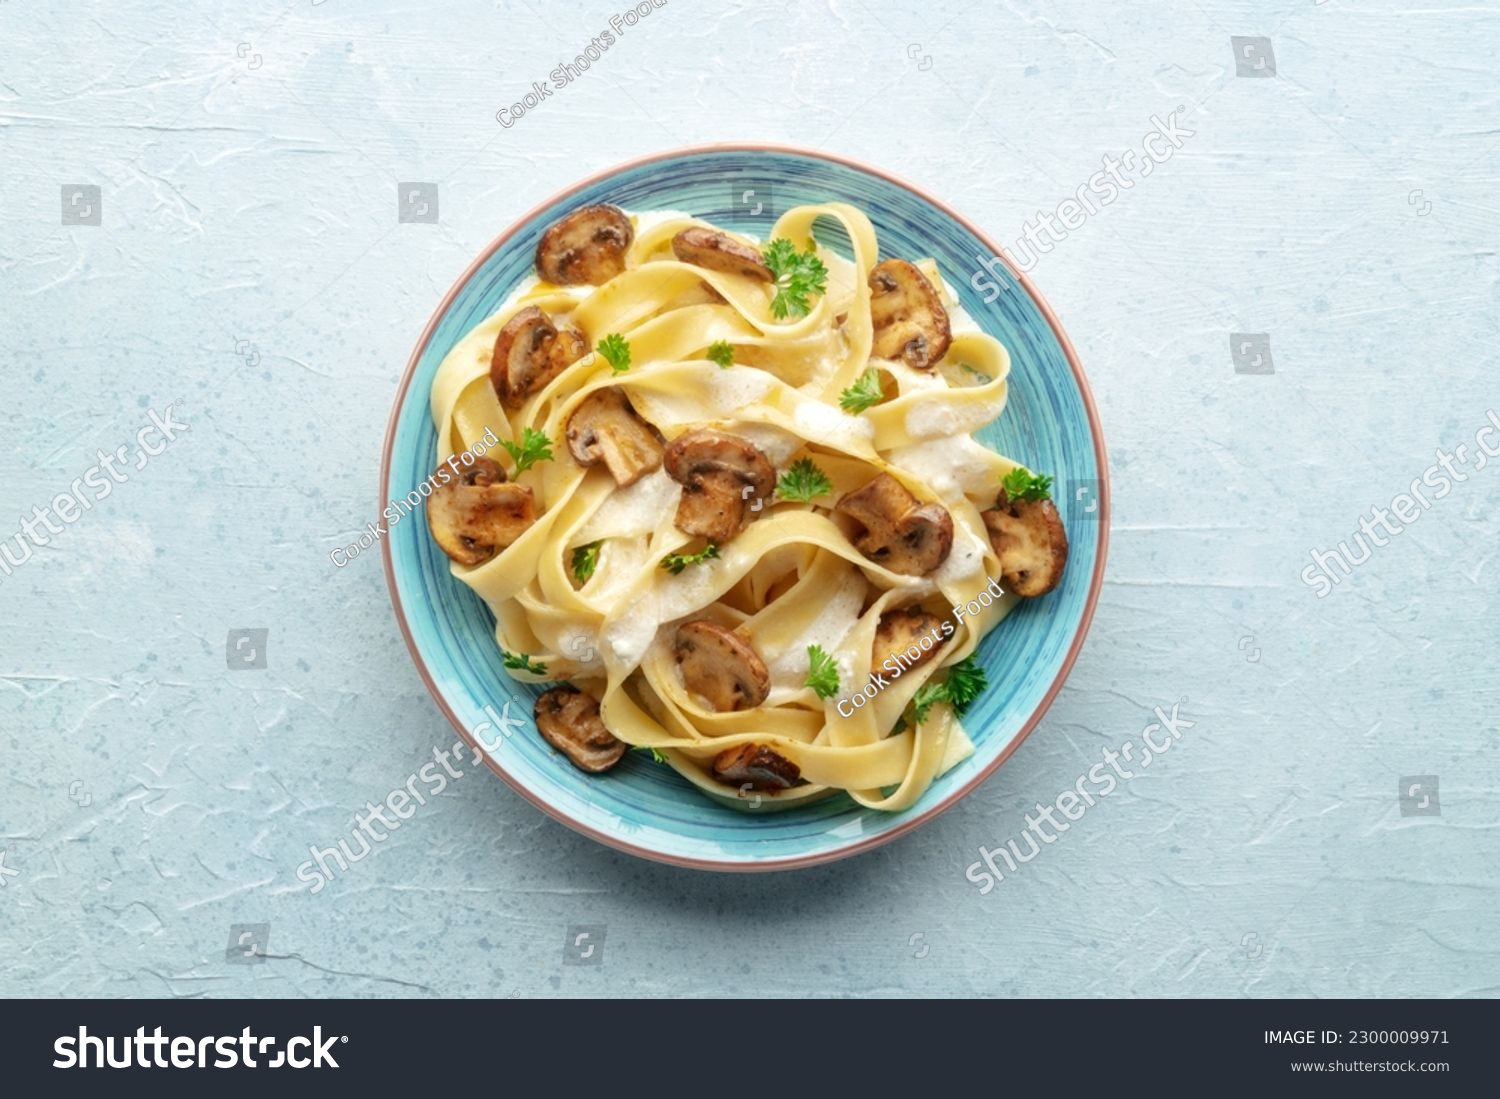 Mushroom pasta, pappardelle with cream sauce and parsley, overhead flat lay shot on a stone background #2300009971